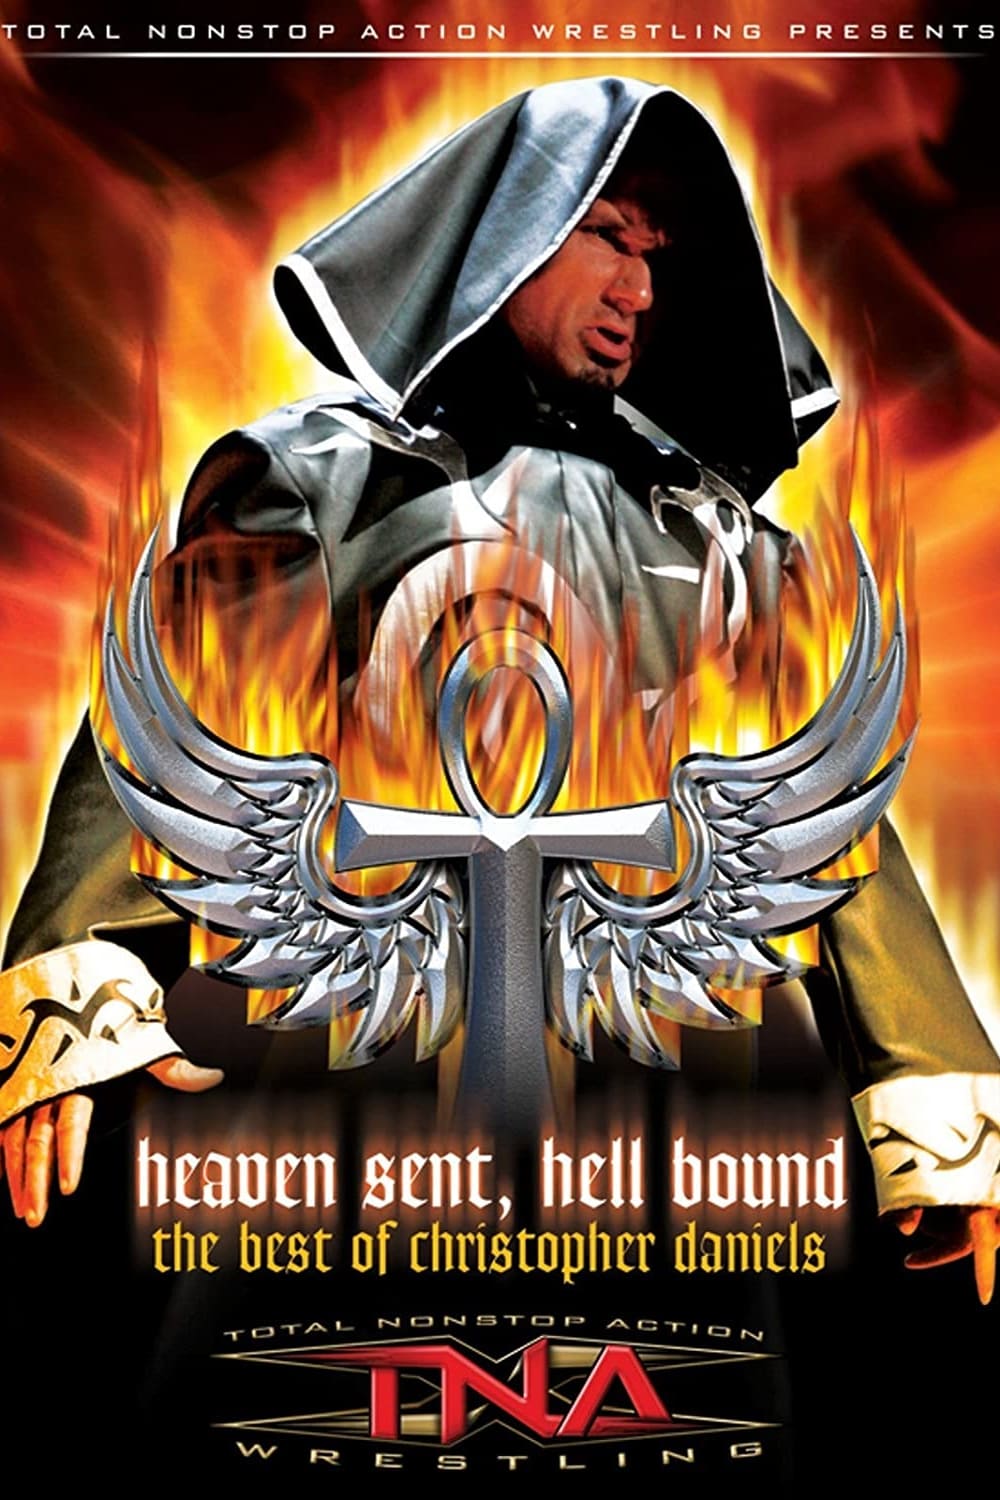 The Best of Christopher Daniels: Heaven Sent, Hell Bound